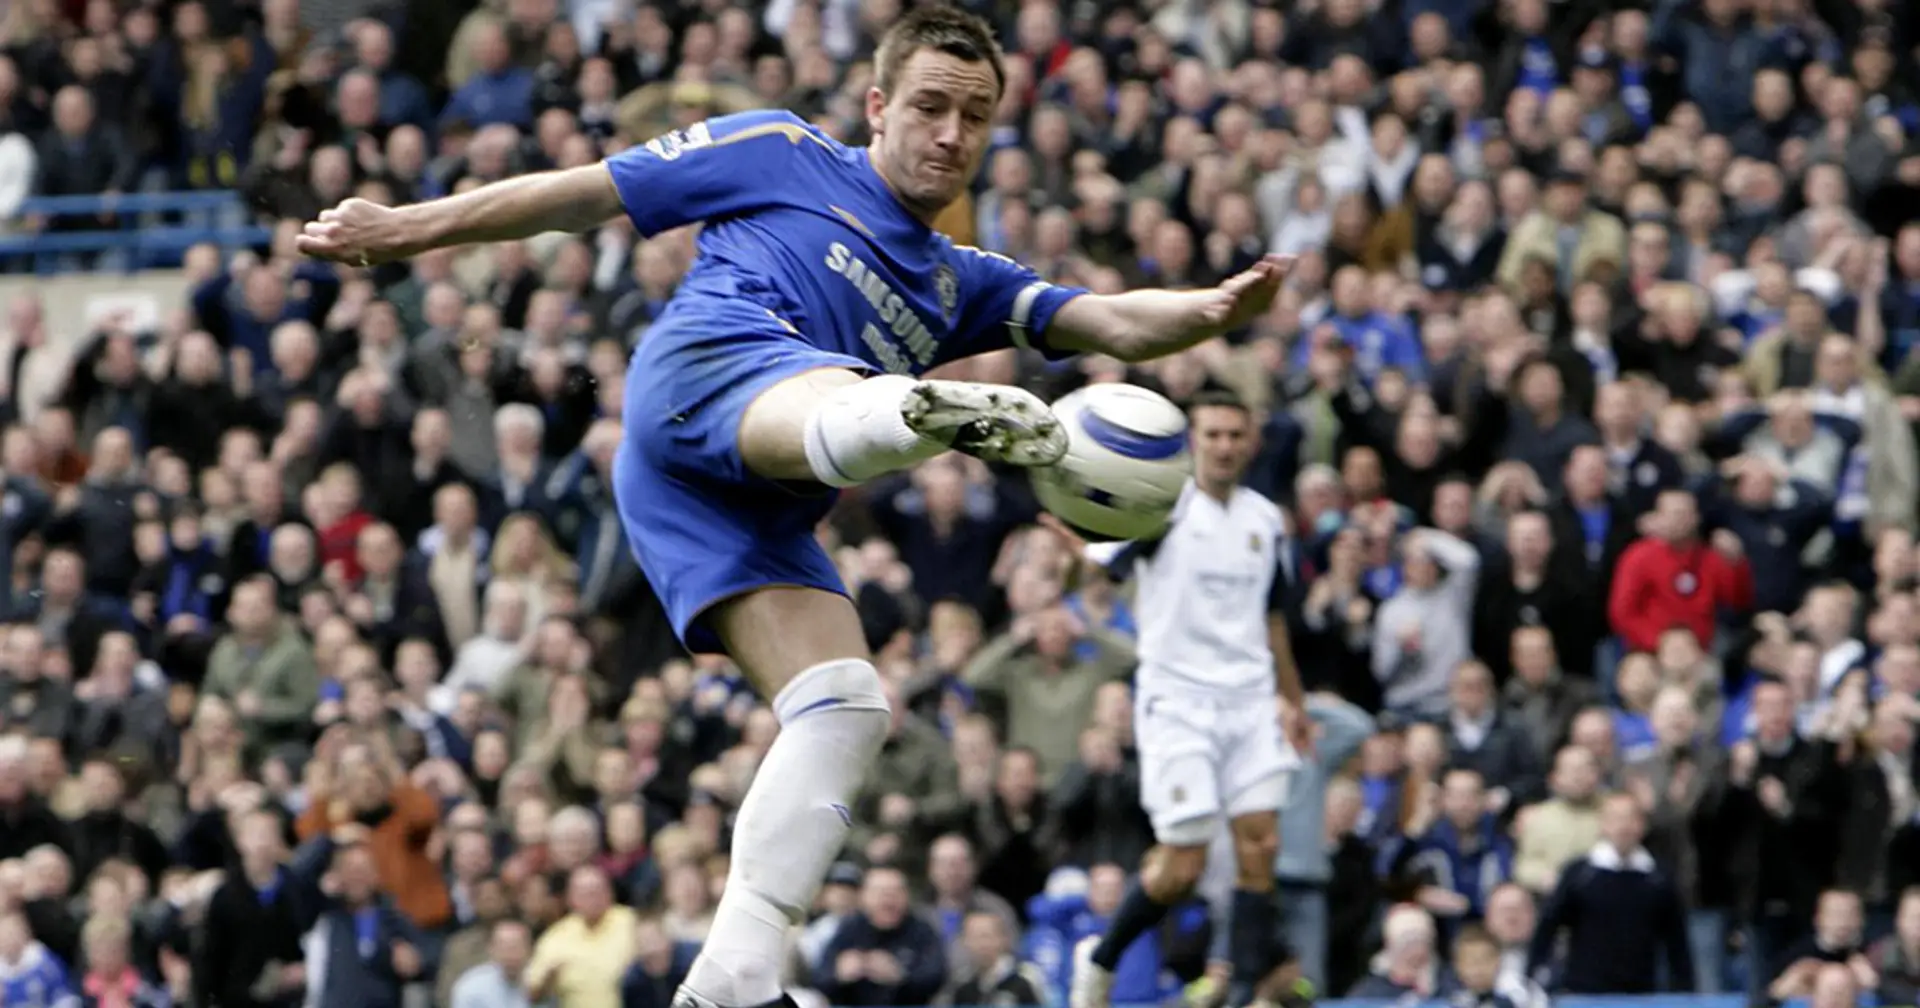 Old but gold: relieve JT's first-half winner vs Newcastle (video)